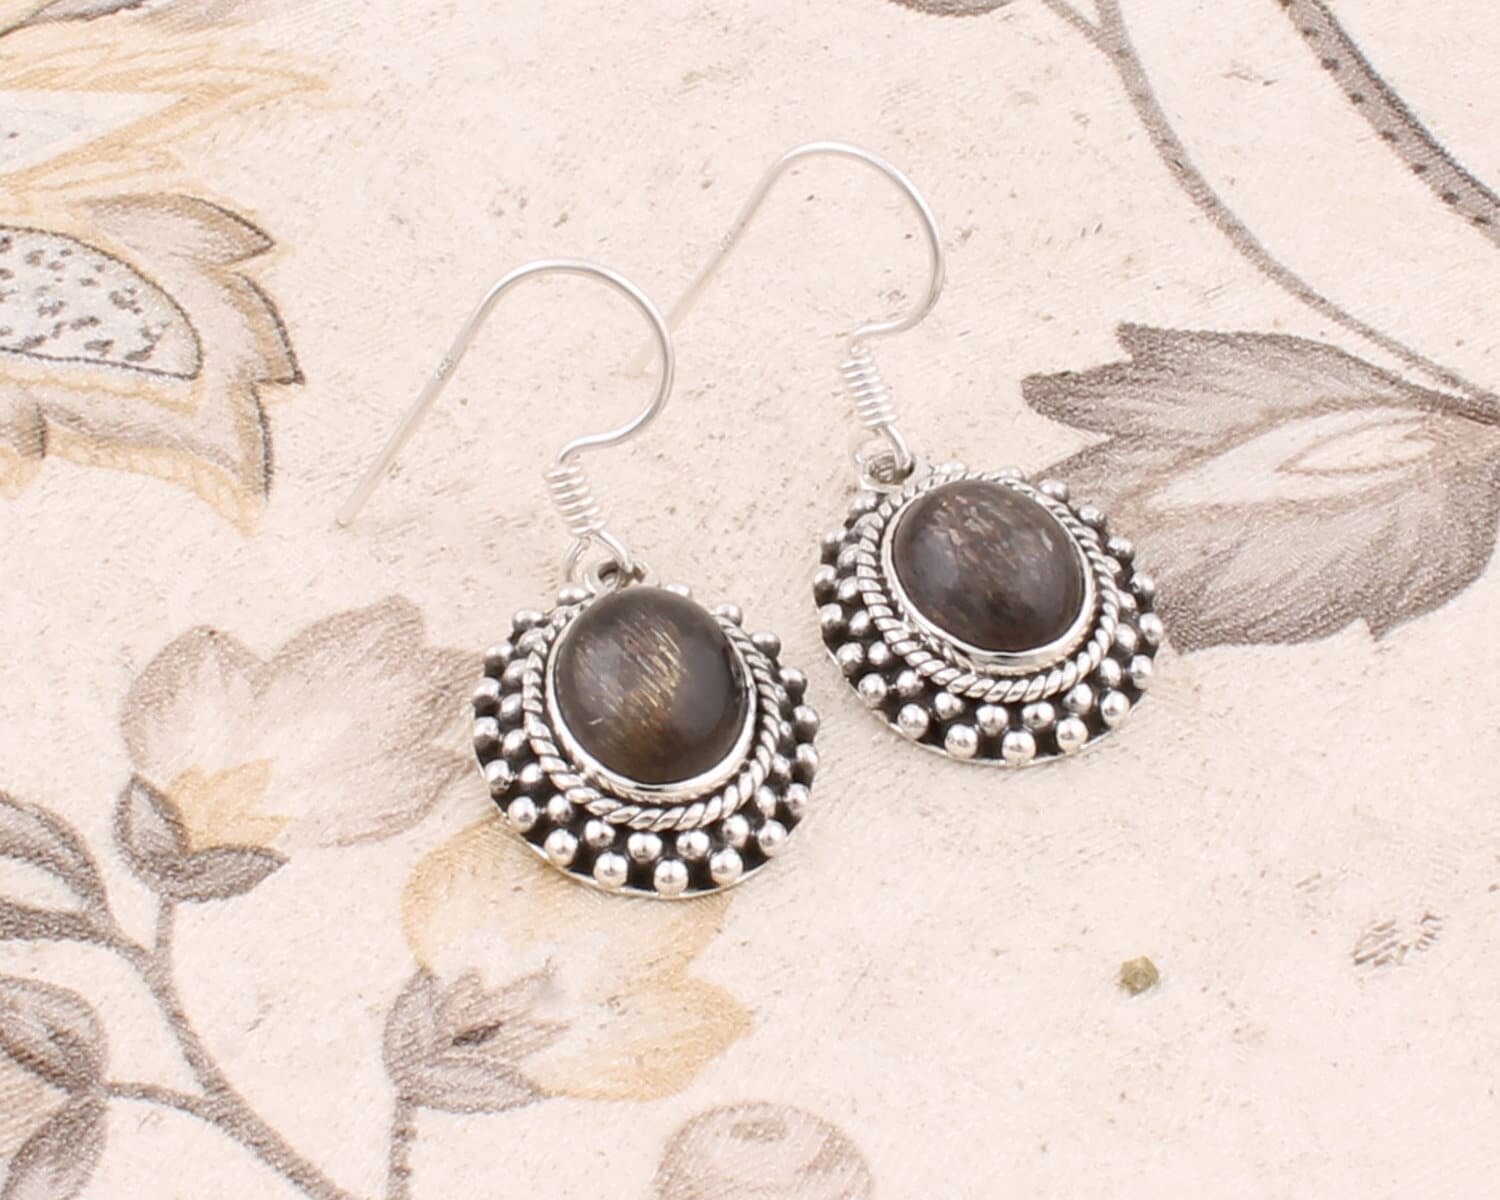 Natural Amazing Black MOON STONE AAA+Quality Gemstone Earring Cabochon Stone Boho Earring 925-Sterling Solid Silver Earring Handmade